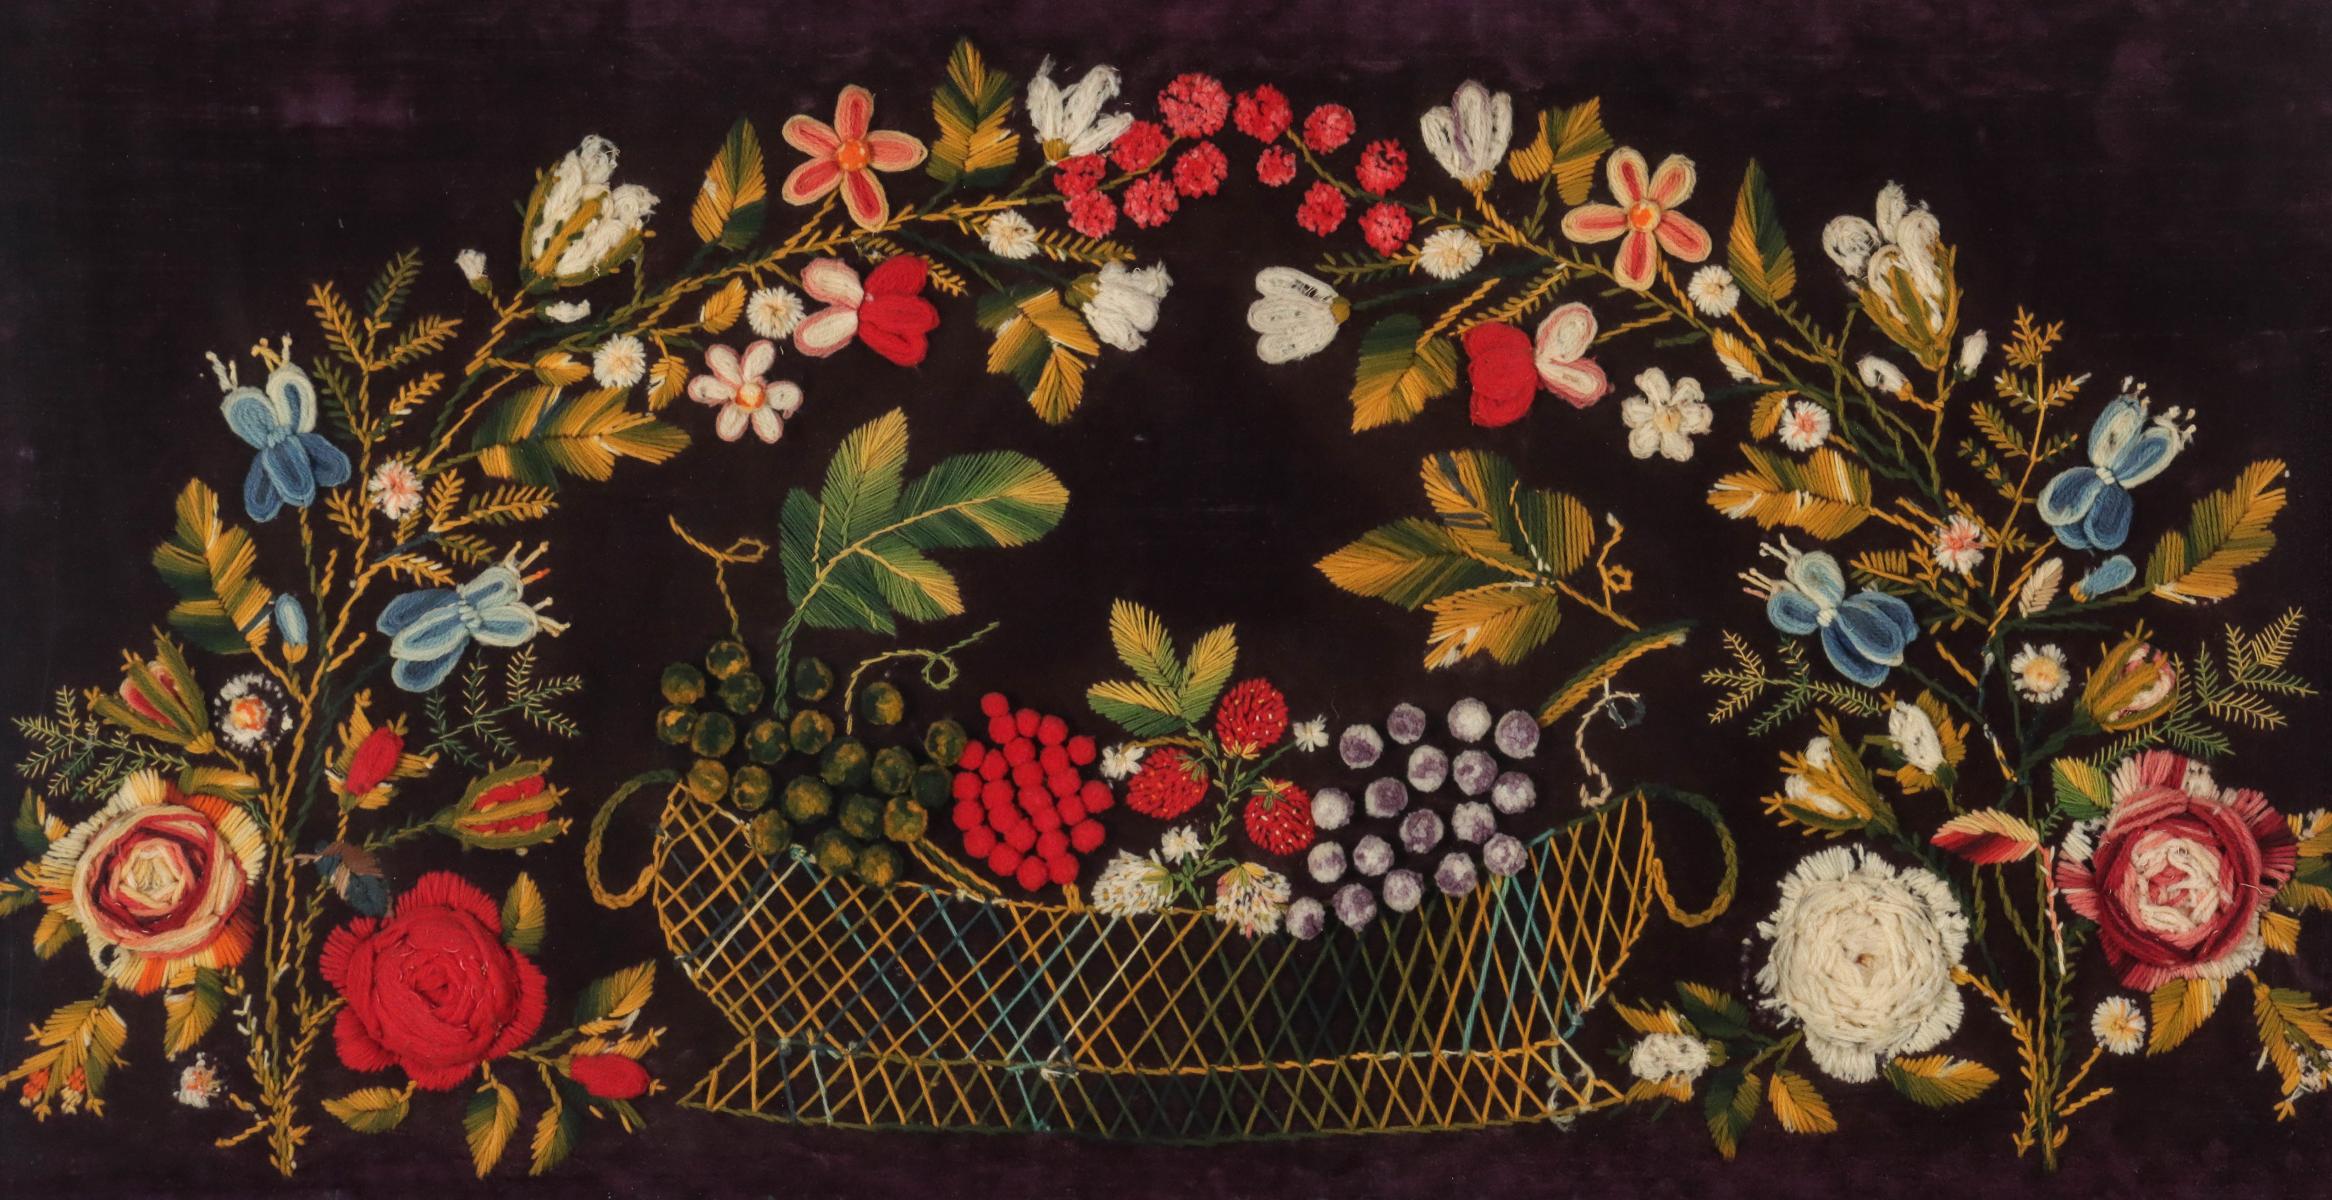 A LARGE 19C. STUMPWORK AND EMBROIDERED VELVET TEXTILE